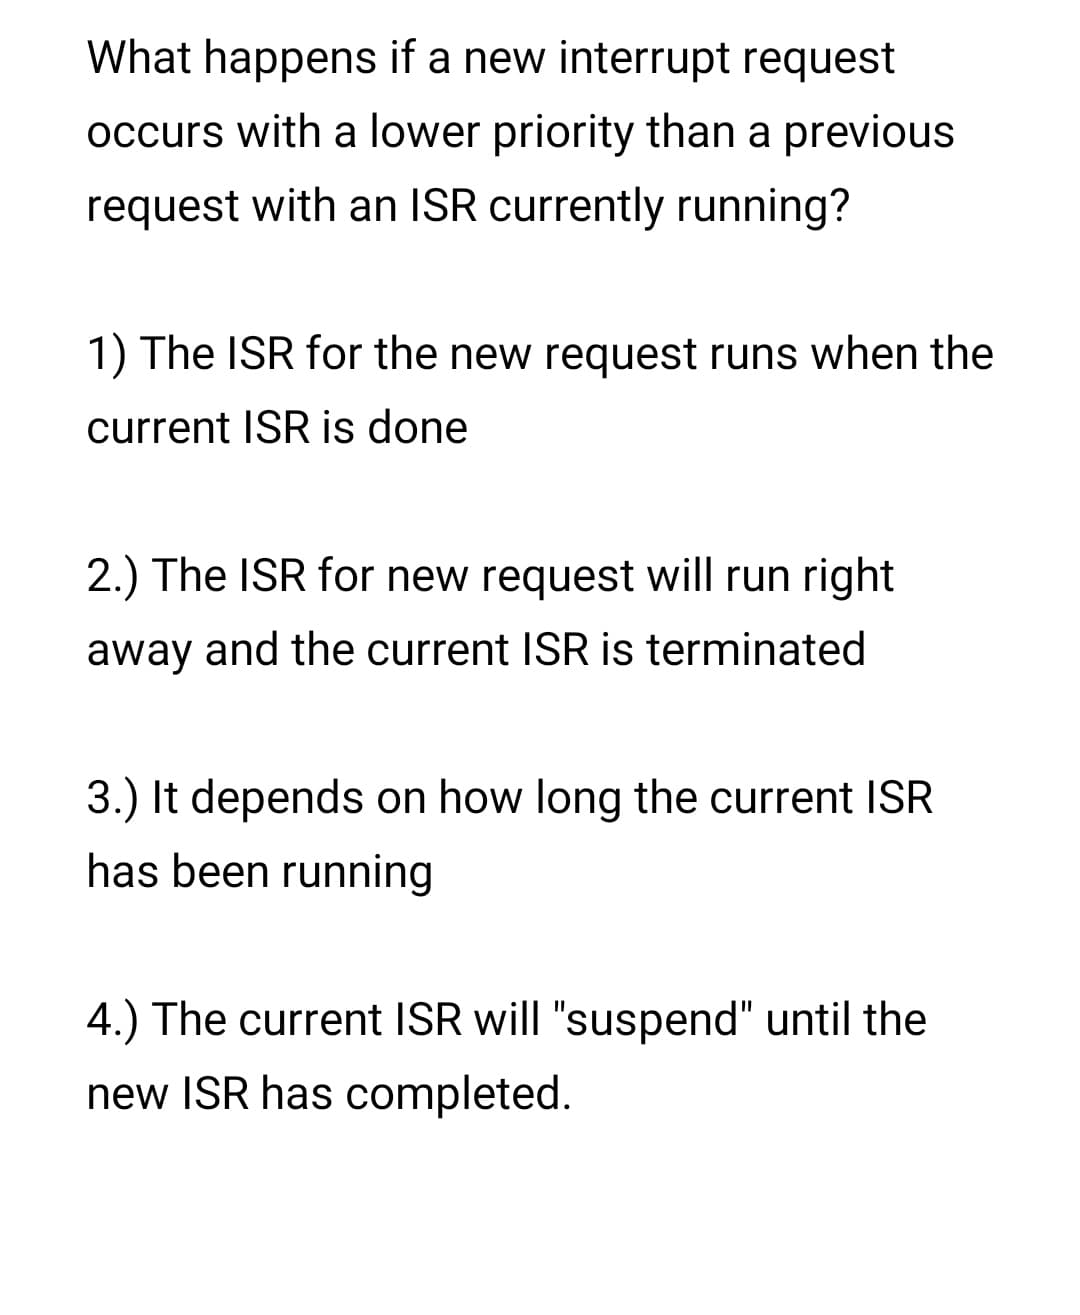 What happens if a new interrupt request
occurs with a lower priority than a previous
request with an ISR currently running?
1) The ISR for the new request runs when the
current ISR is done
2.) The ISR for new request will run right
away and the current ISR is terminated
3.) It depends on how long the current ISR
has been running
4.) The current ISR will "suspend" until the
new ISR has completed.
